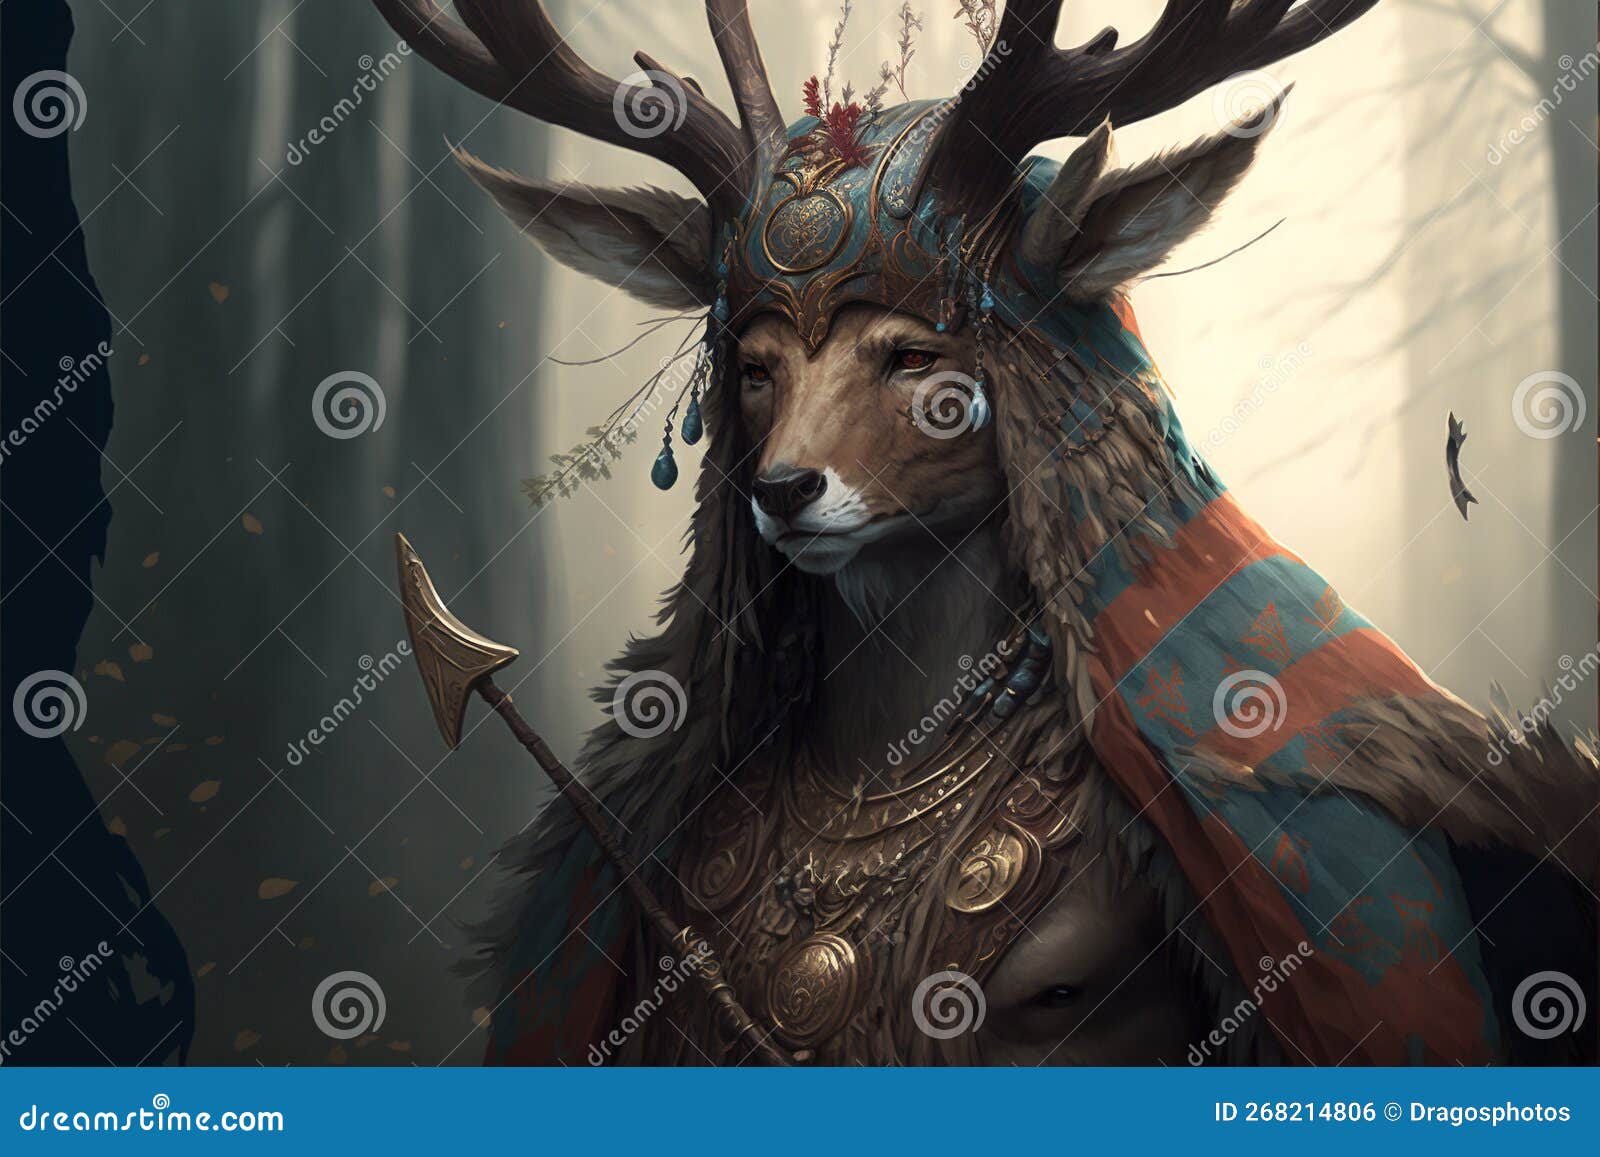 deer animal portrait dressed as a warrior fighter or combatant soldier concept. ai generated